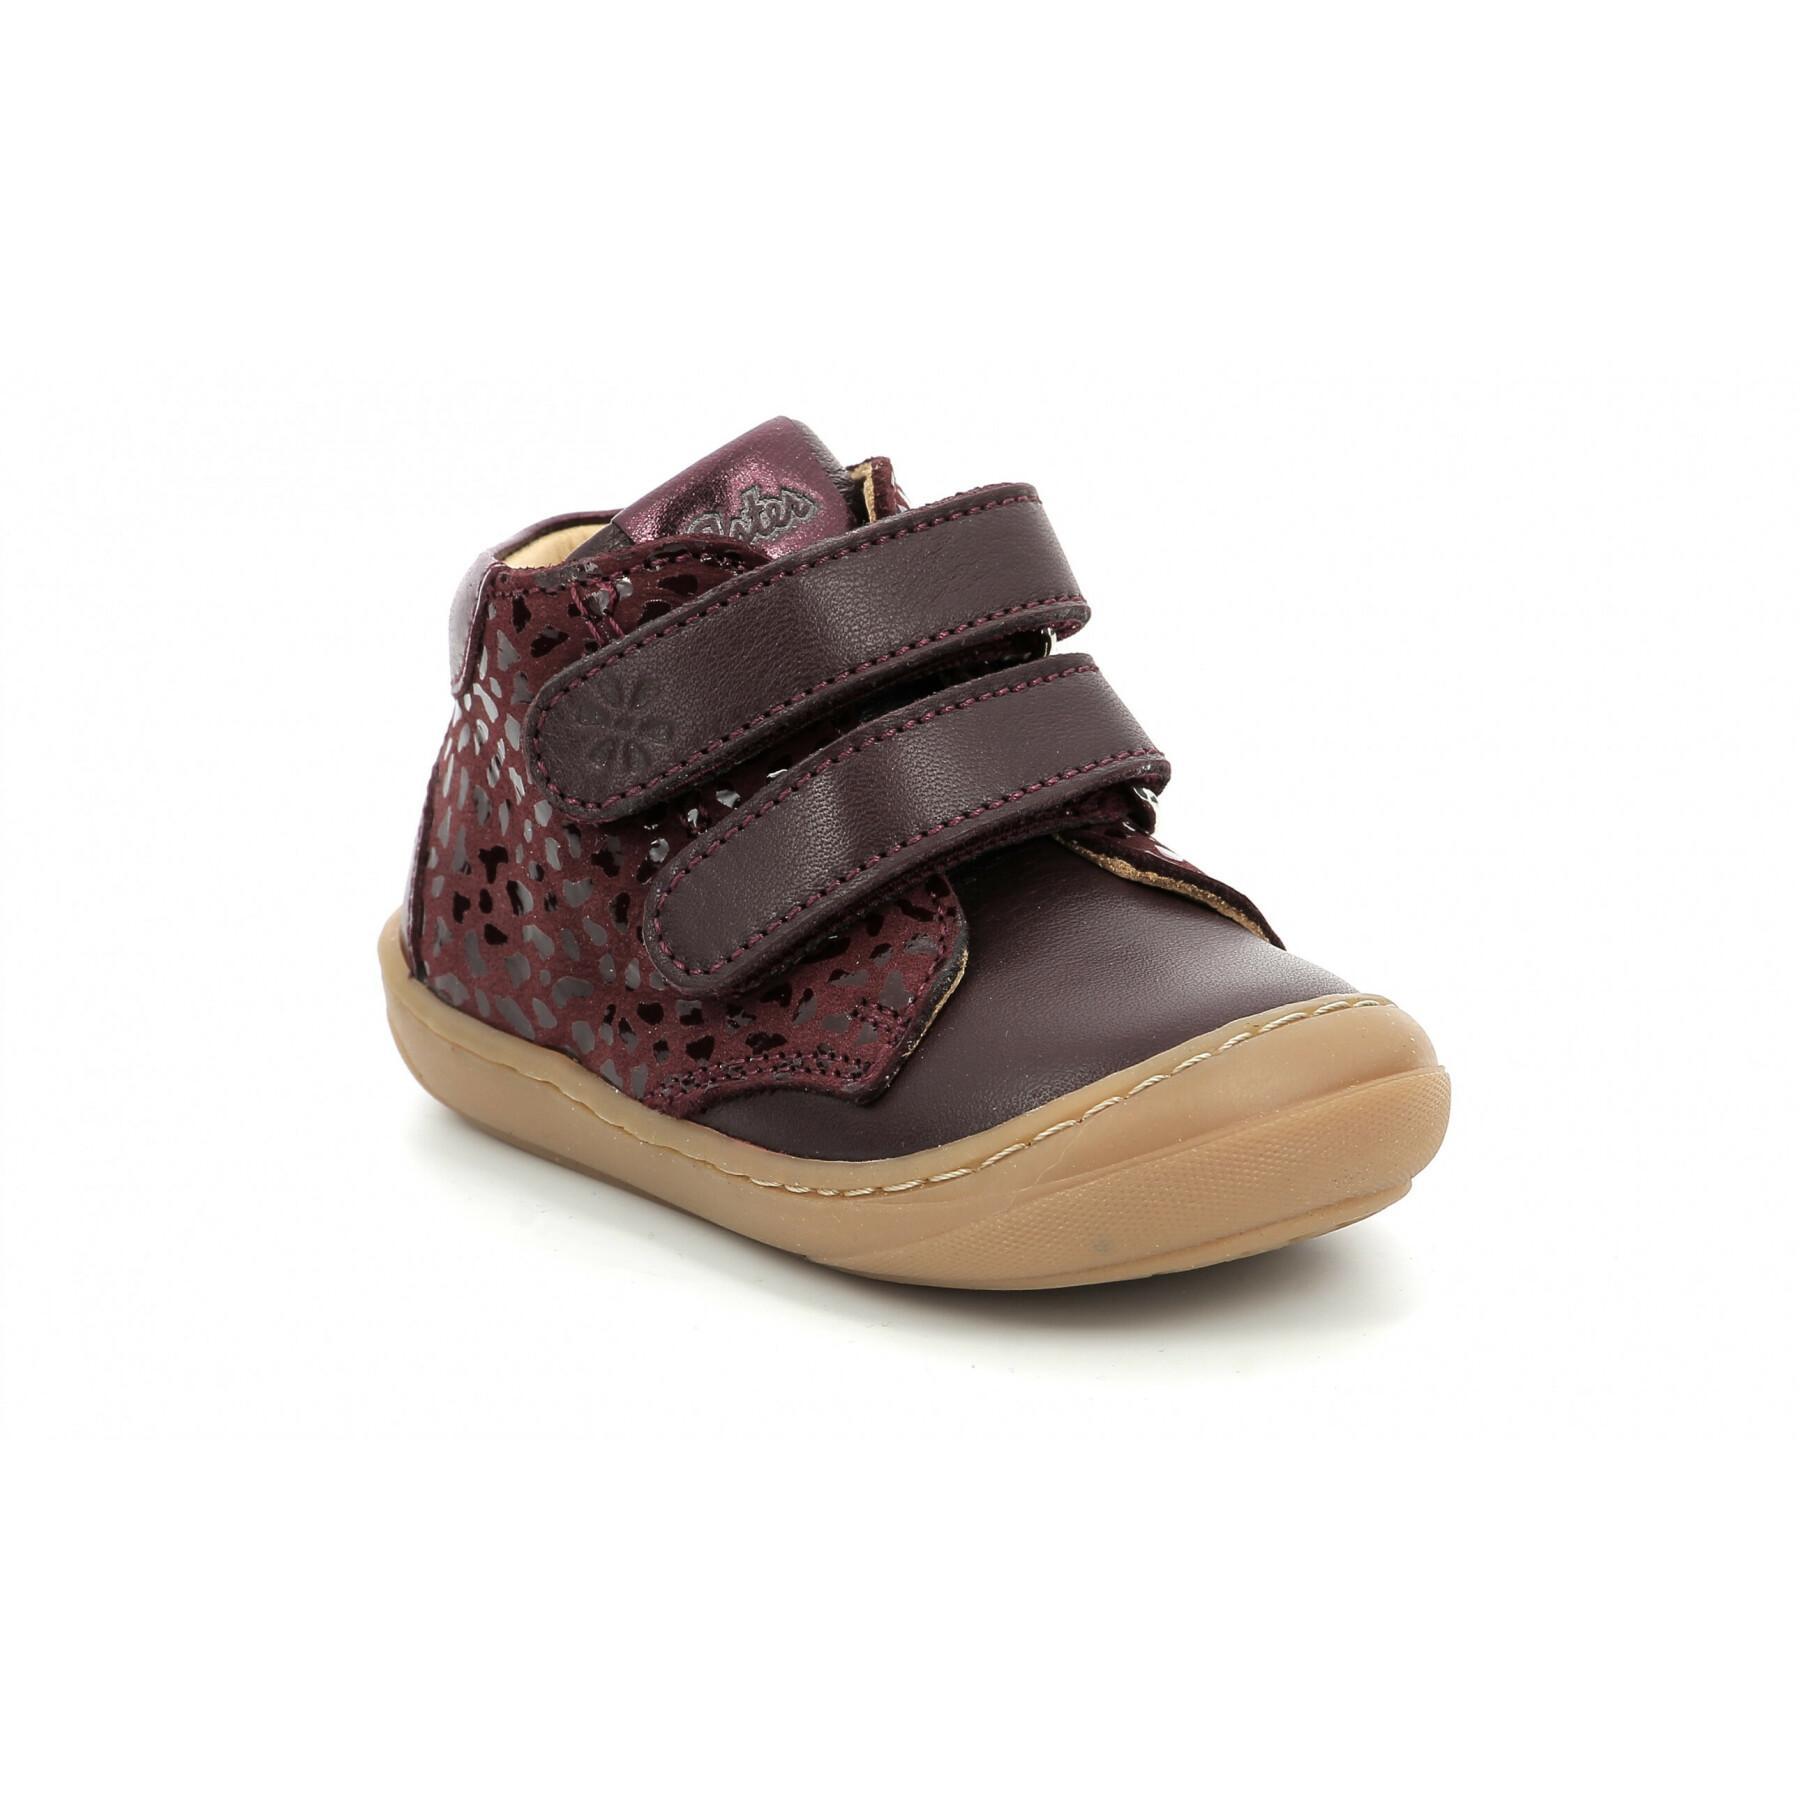 Baby girl sneakers Aster Chyo